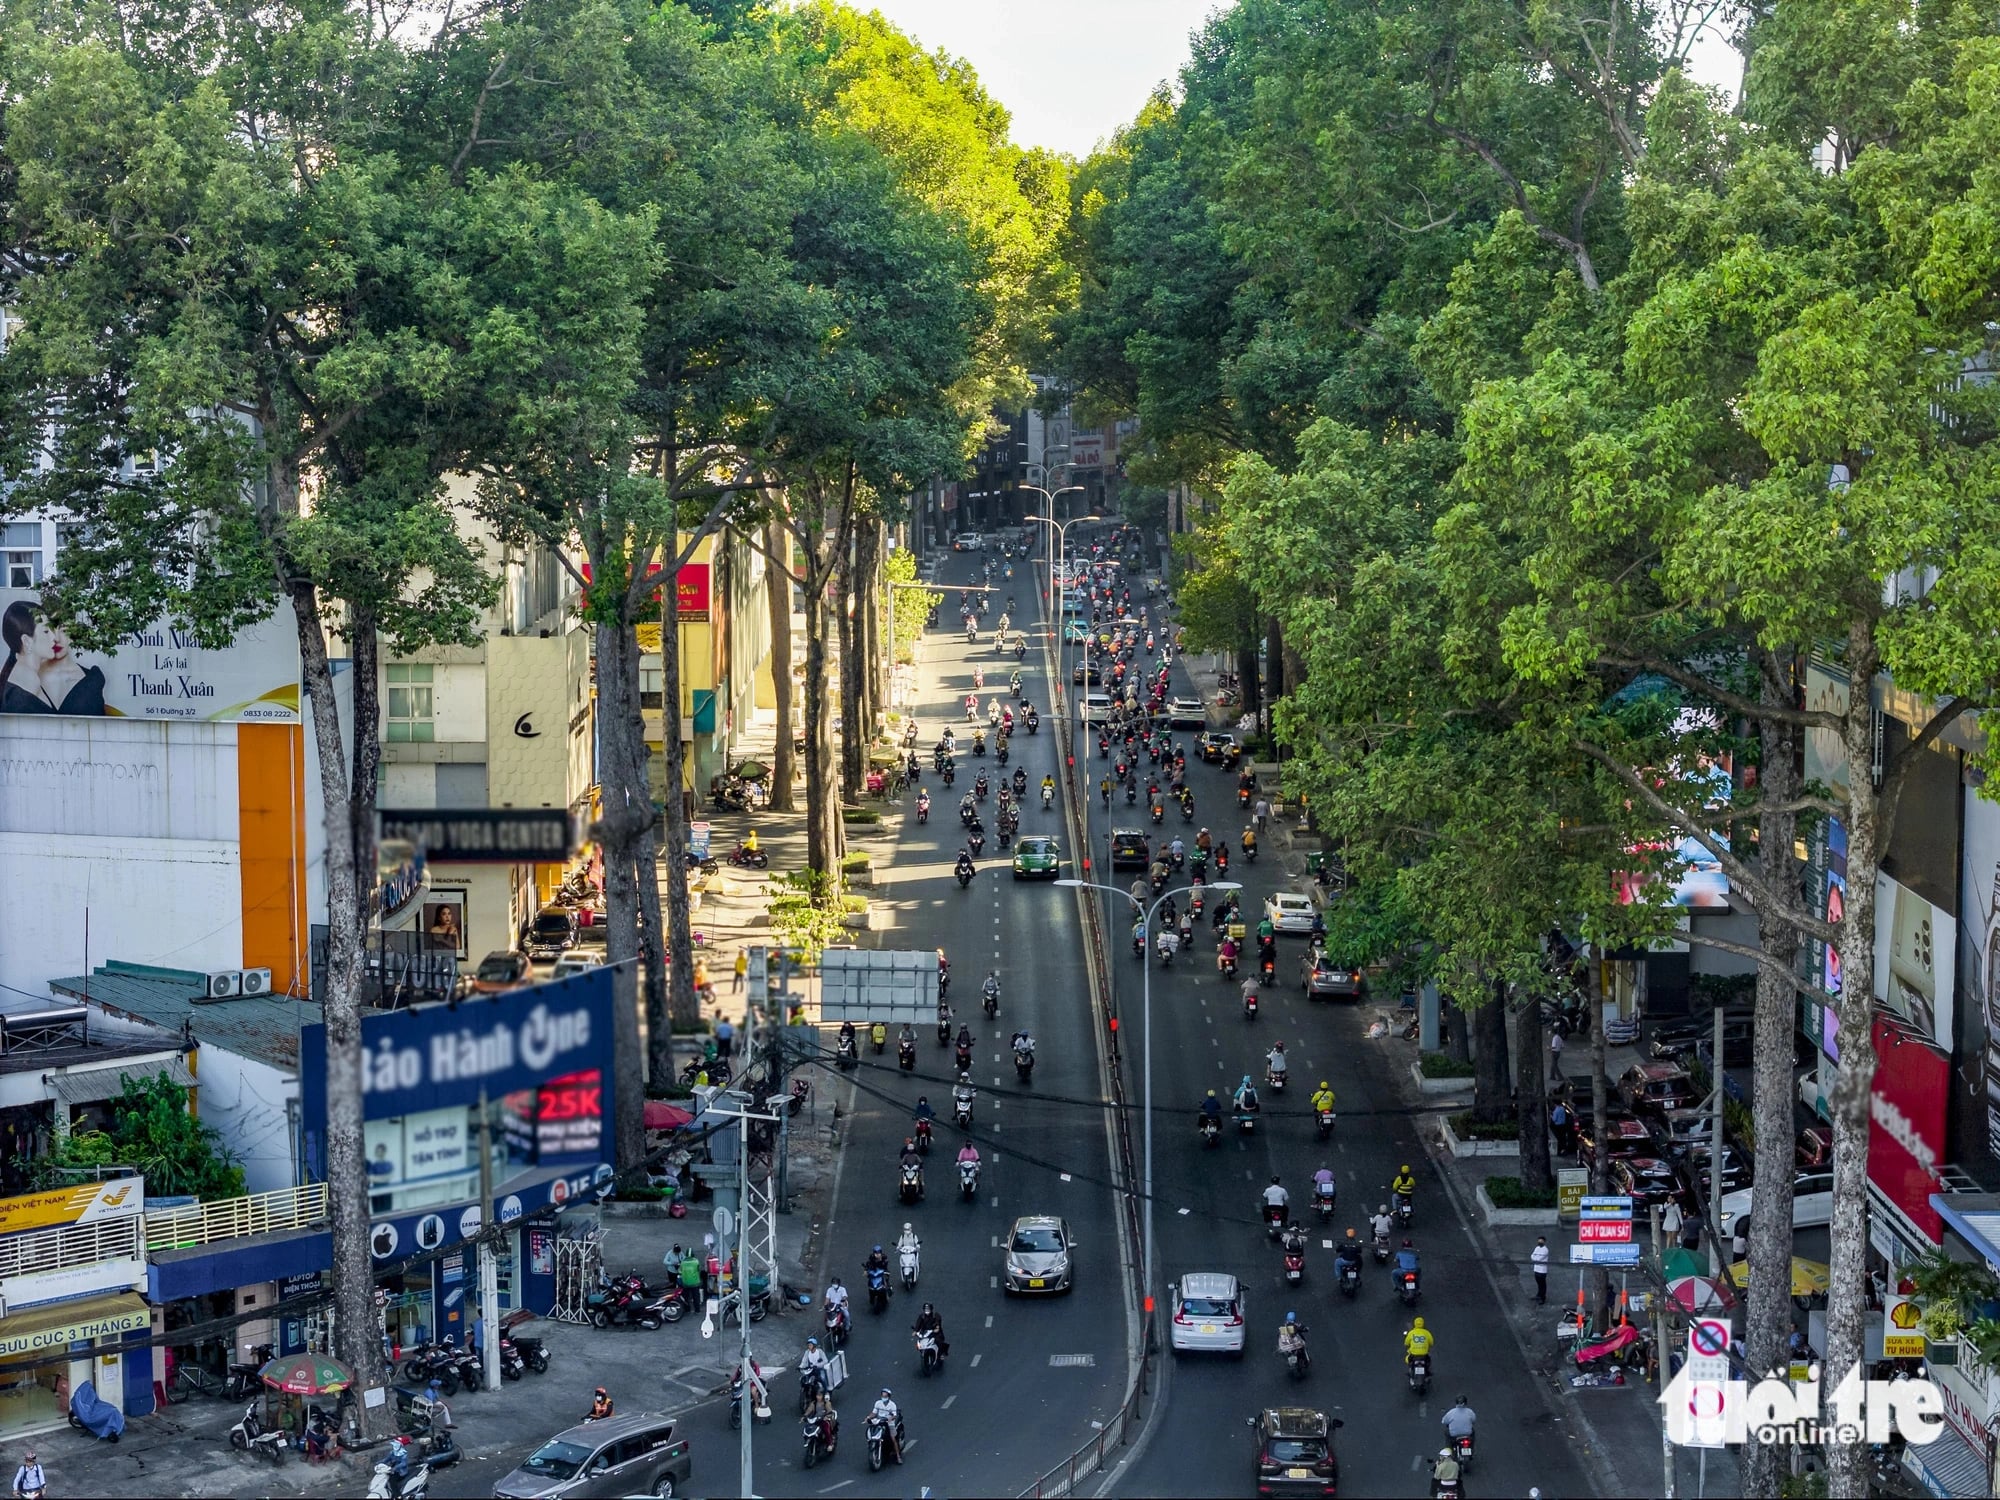 Trees are important, but city needs space to build roads: Ho Chi Minh City greenery official